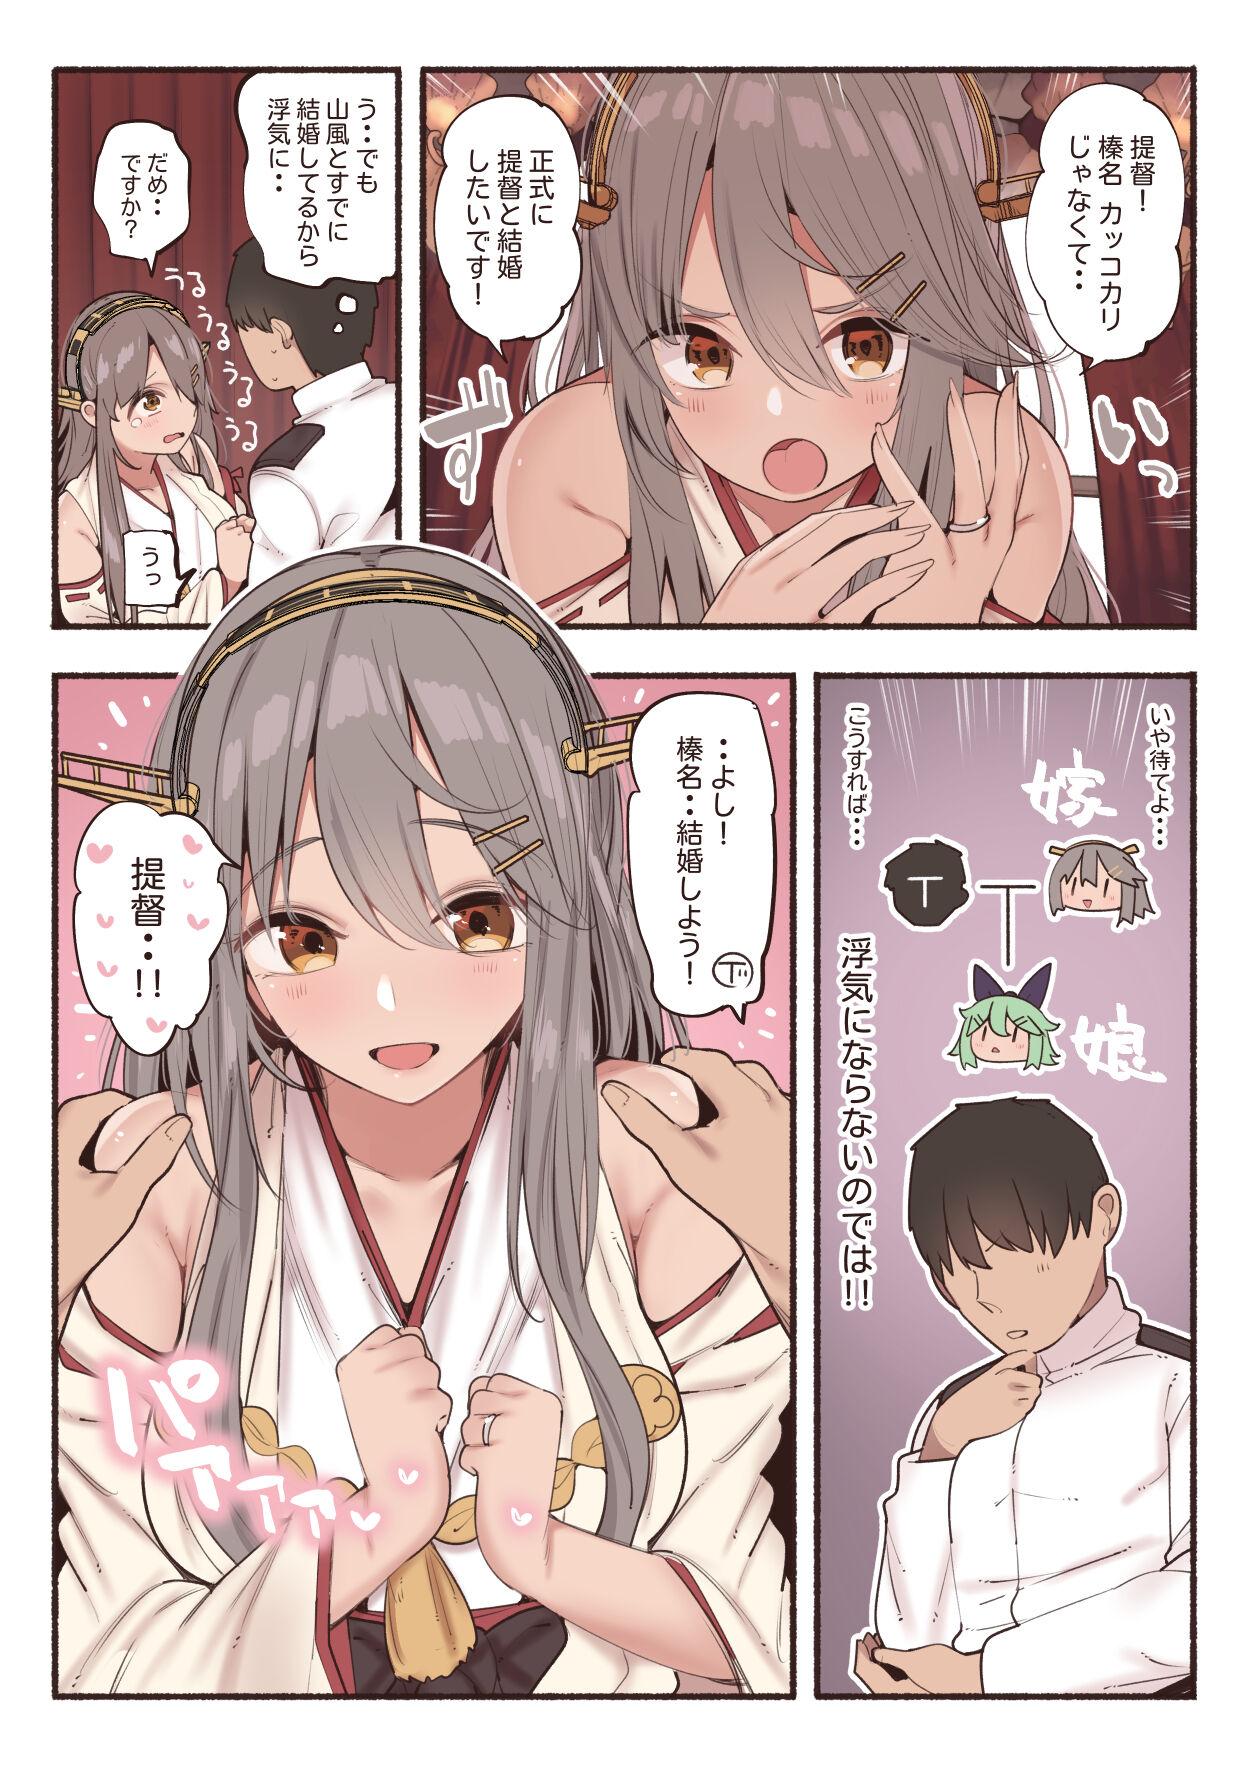 Hottie 榛名と結婚初夜 - Kantai collection Sloppy Blowjob - Picture 2